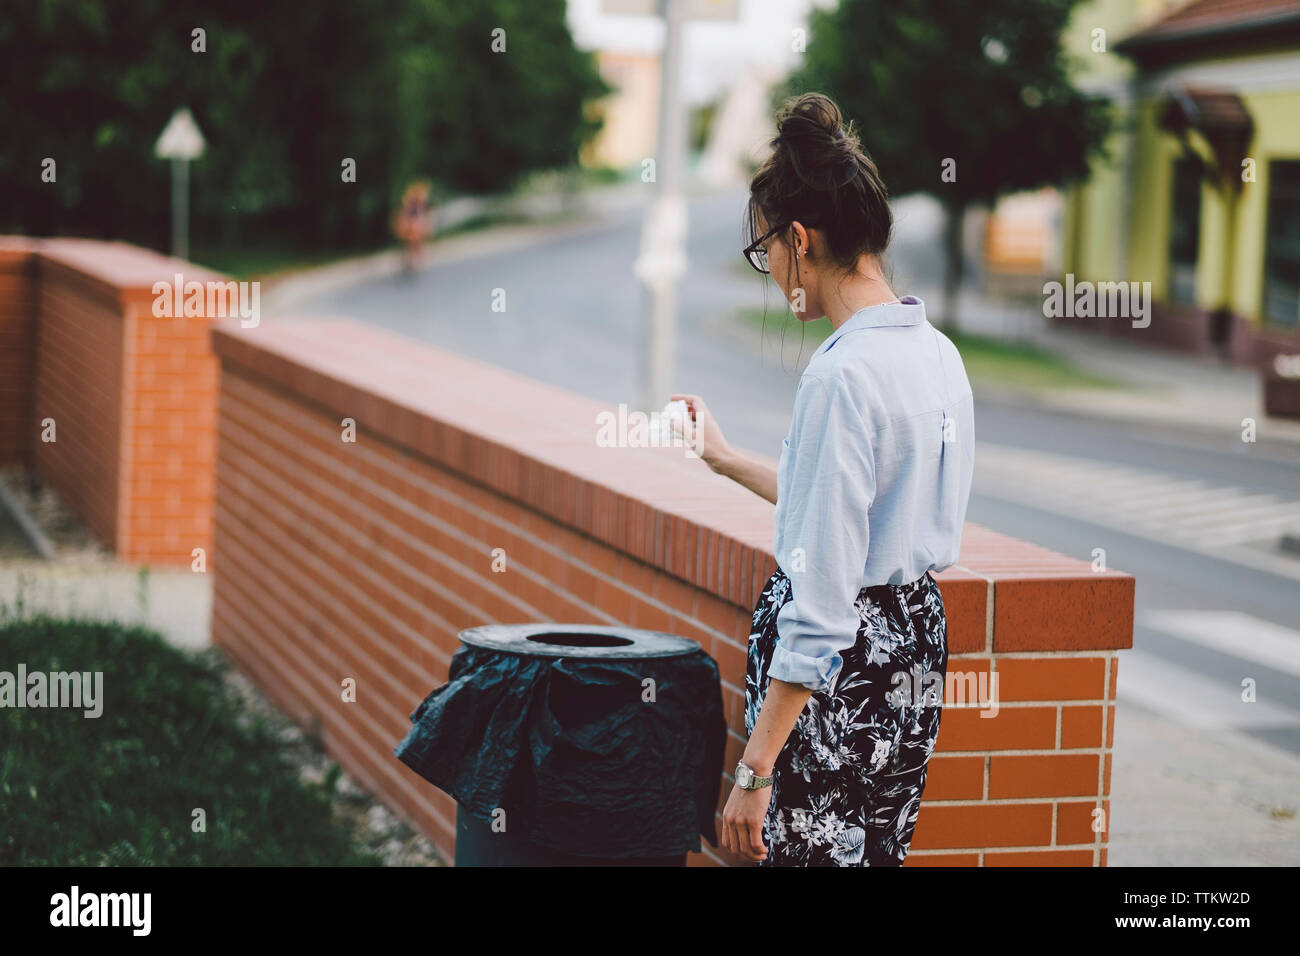 Woman throwing garbage in container Stock Photo